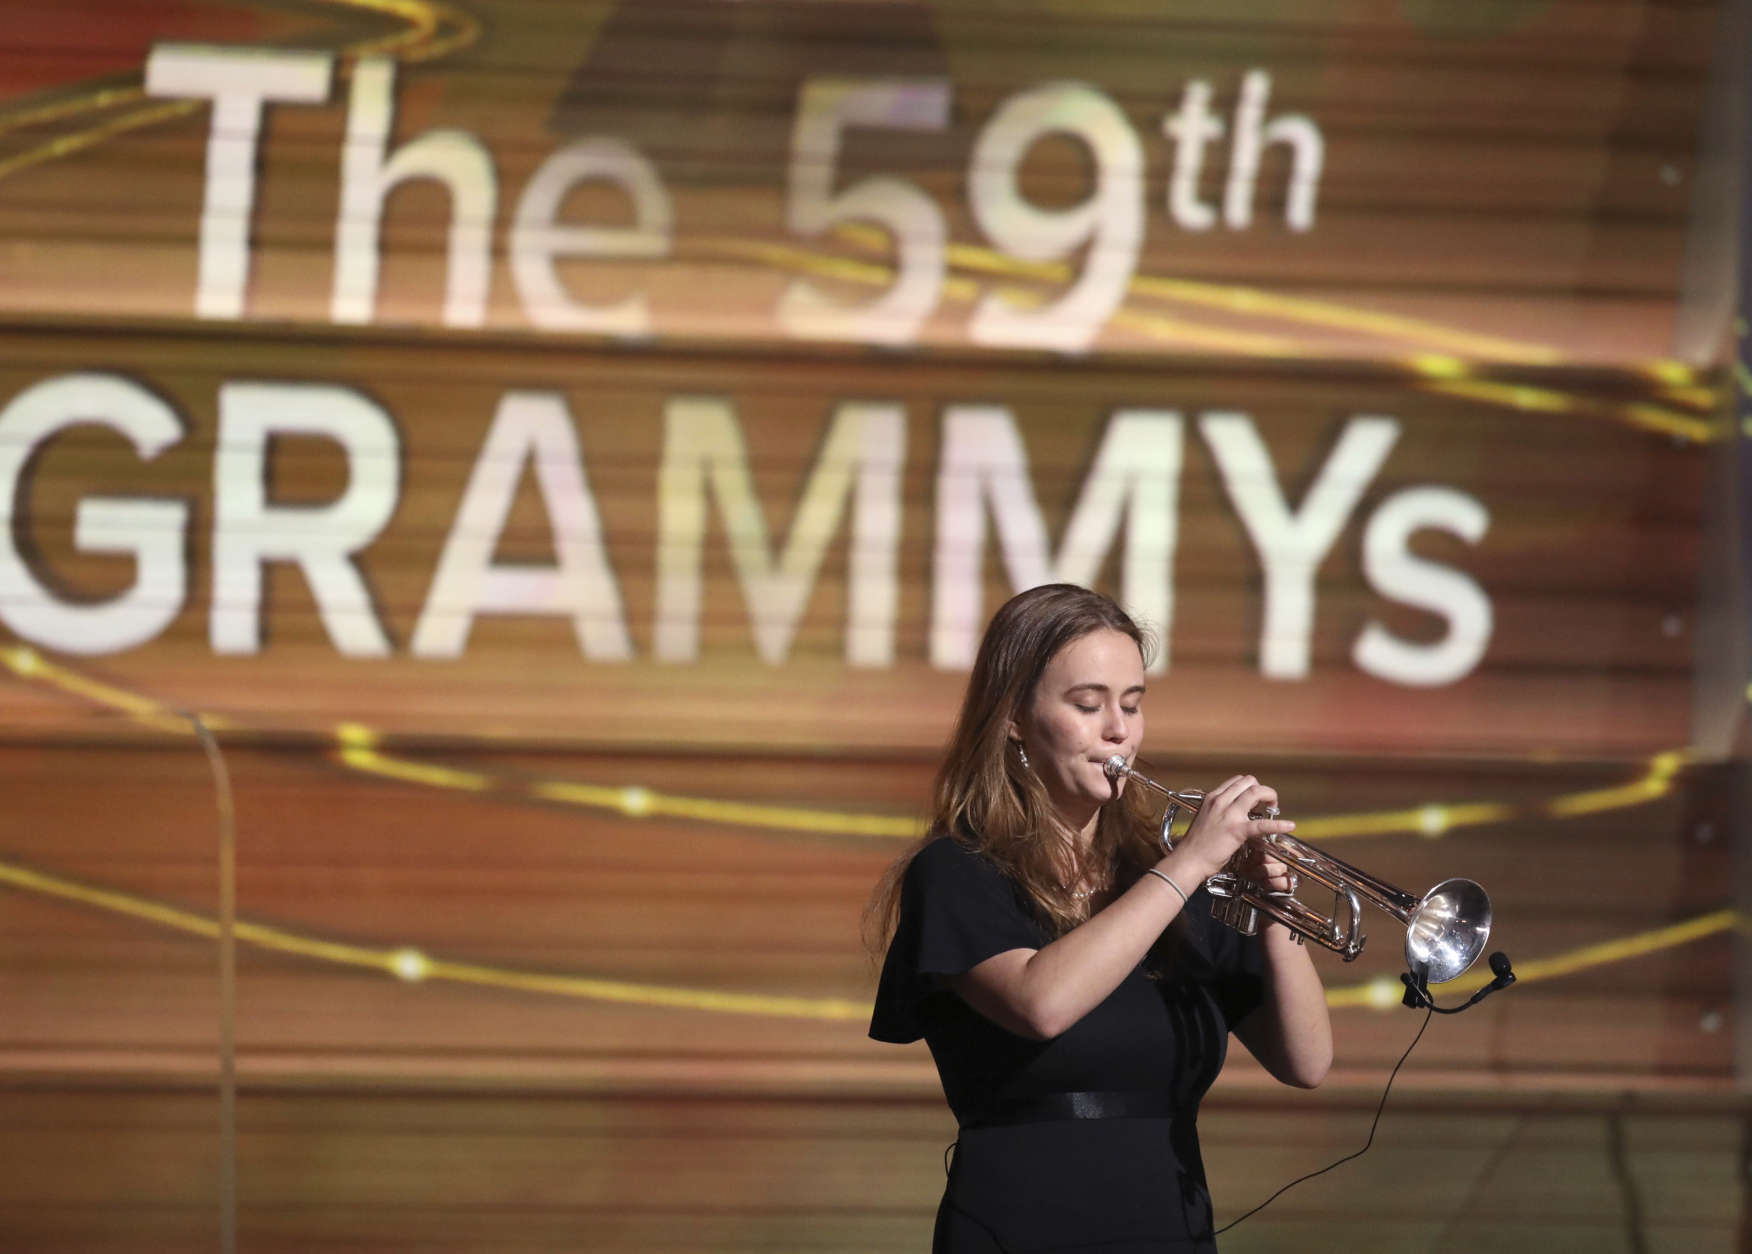 Miranda Agnew performs at the 59th annual Grammy Awards on Sunday, Feb. 12, 2017, in Los Angeles. (Photo by Matt Sayles/Invision/AP)